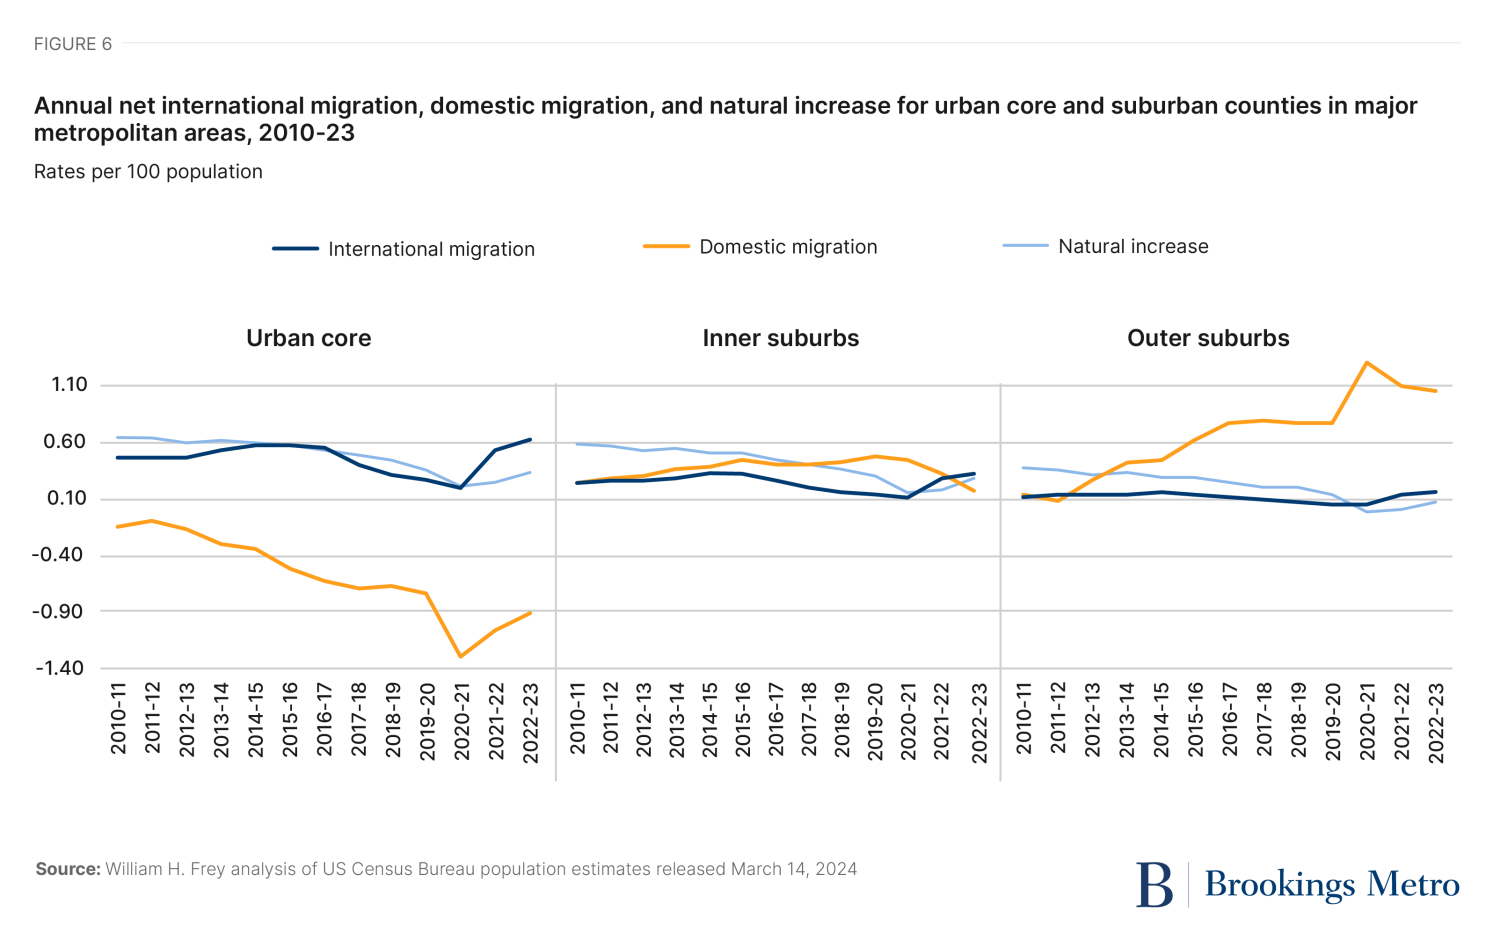 Figure 6. Annual Net Domestic Migration, International Migration and Natural Increase for Urban Core and Suburban Counties in Major Metropolitan Areas 2010-2023